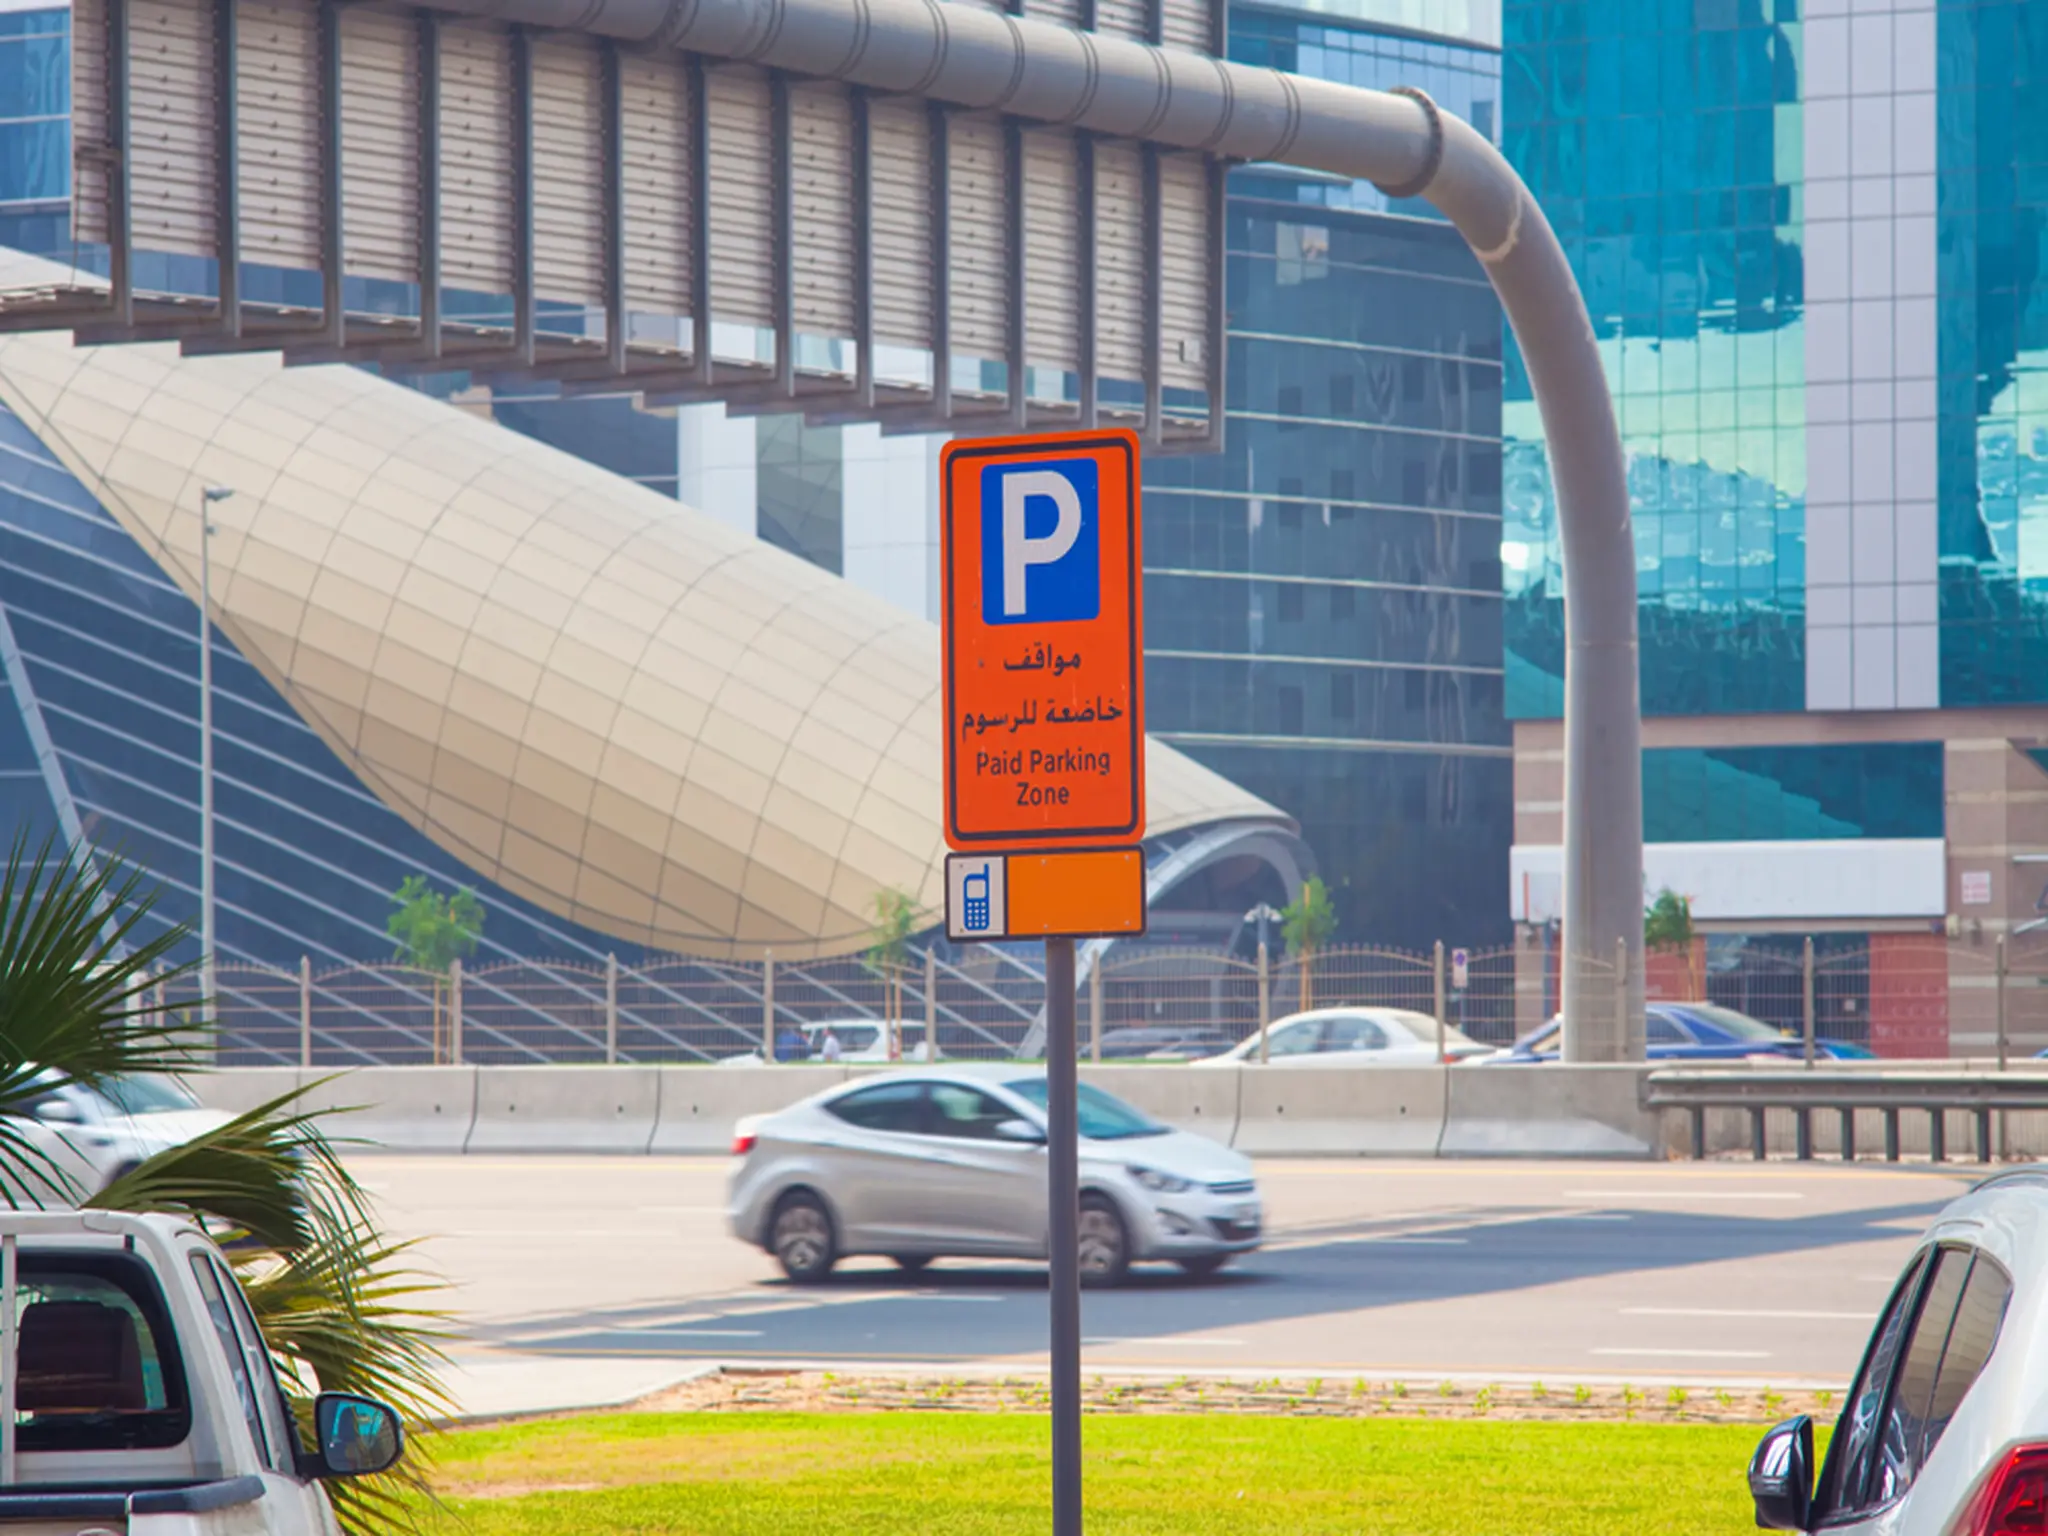 Announcing the behaviors prohibited for drivers in public parking in the Emirates